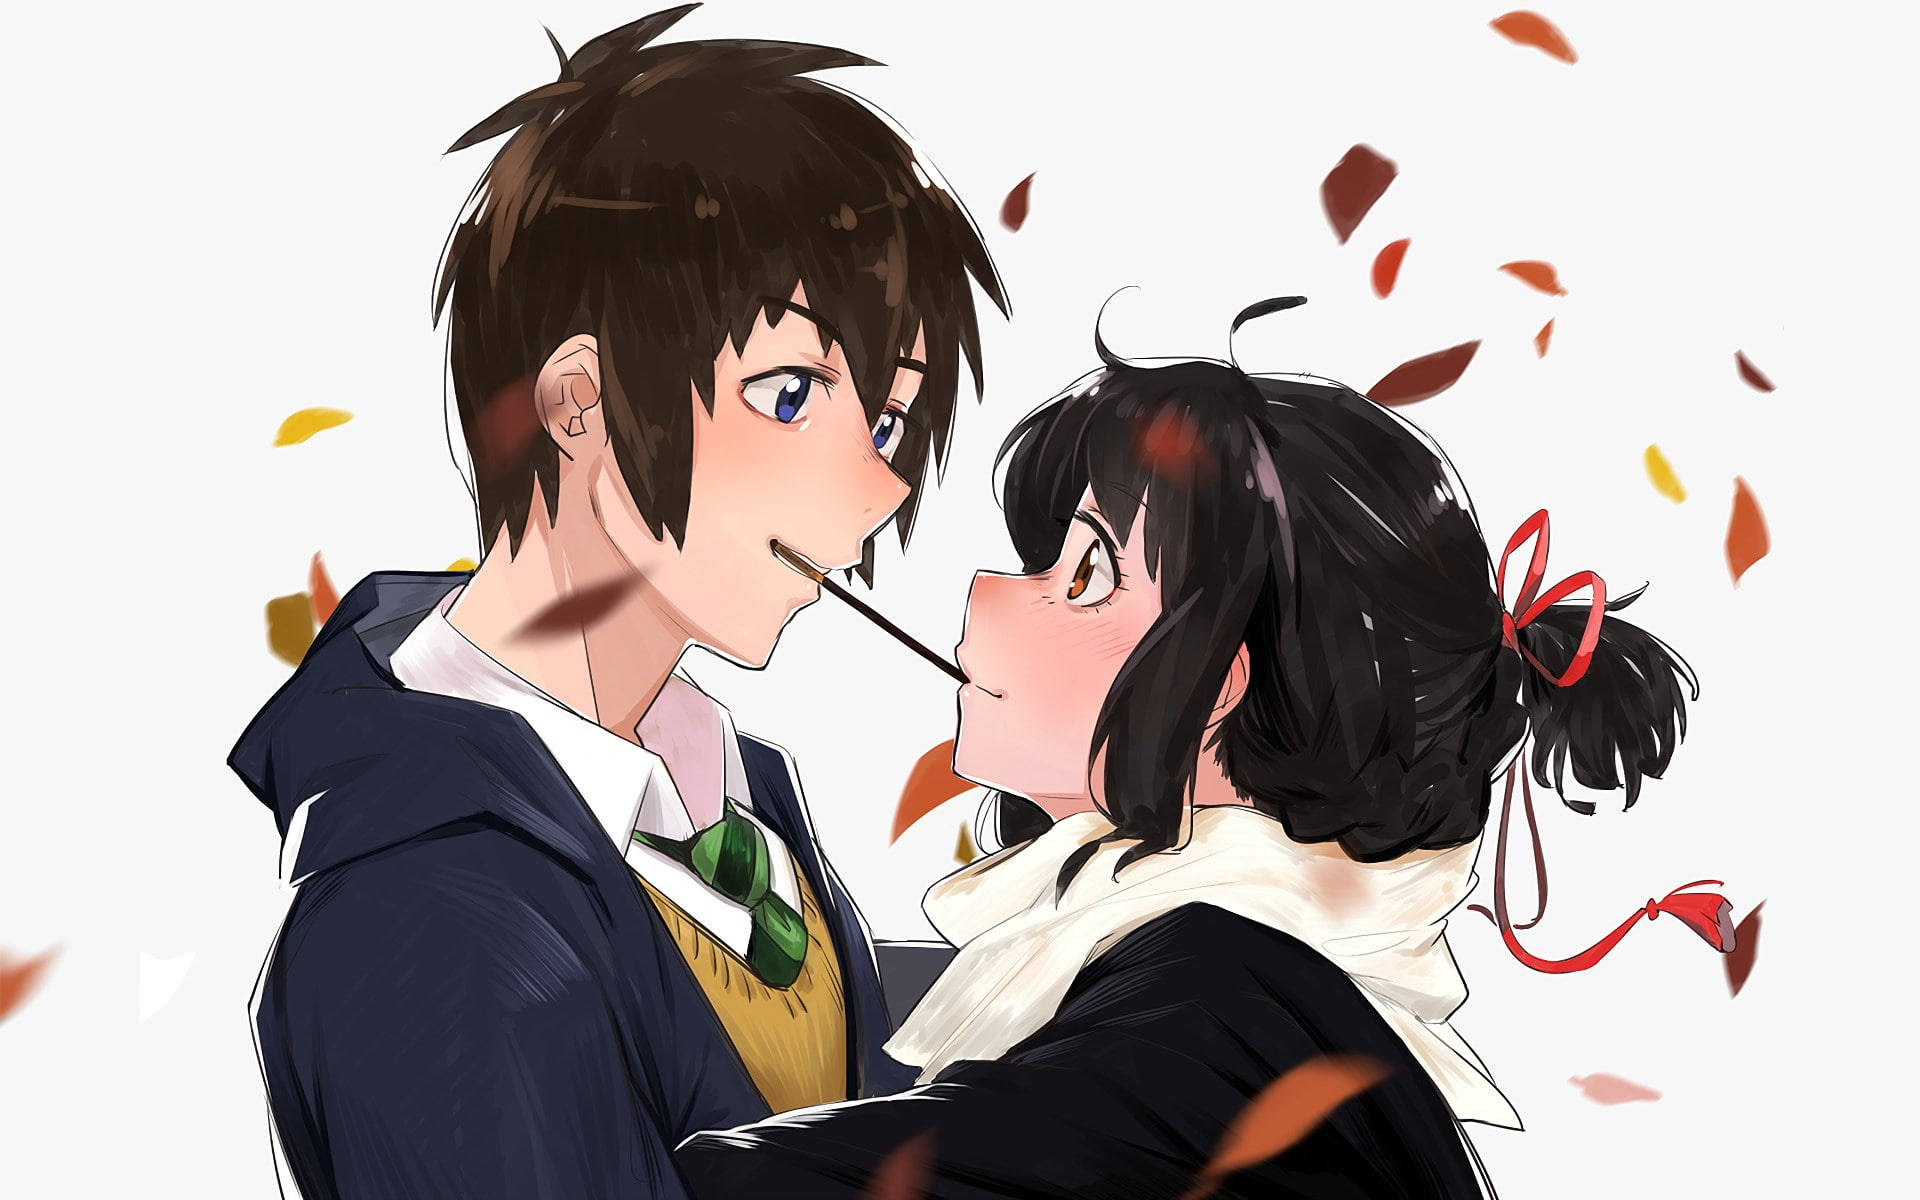 Cute Anime Couple Sharing A Snack Background